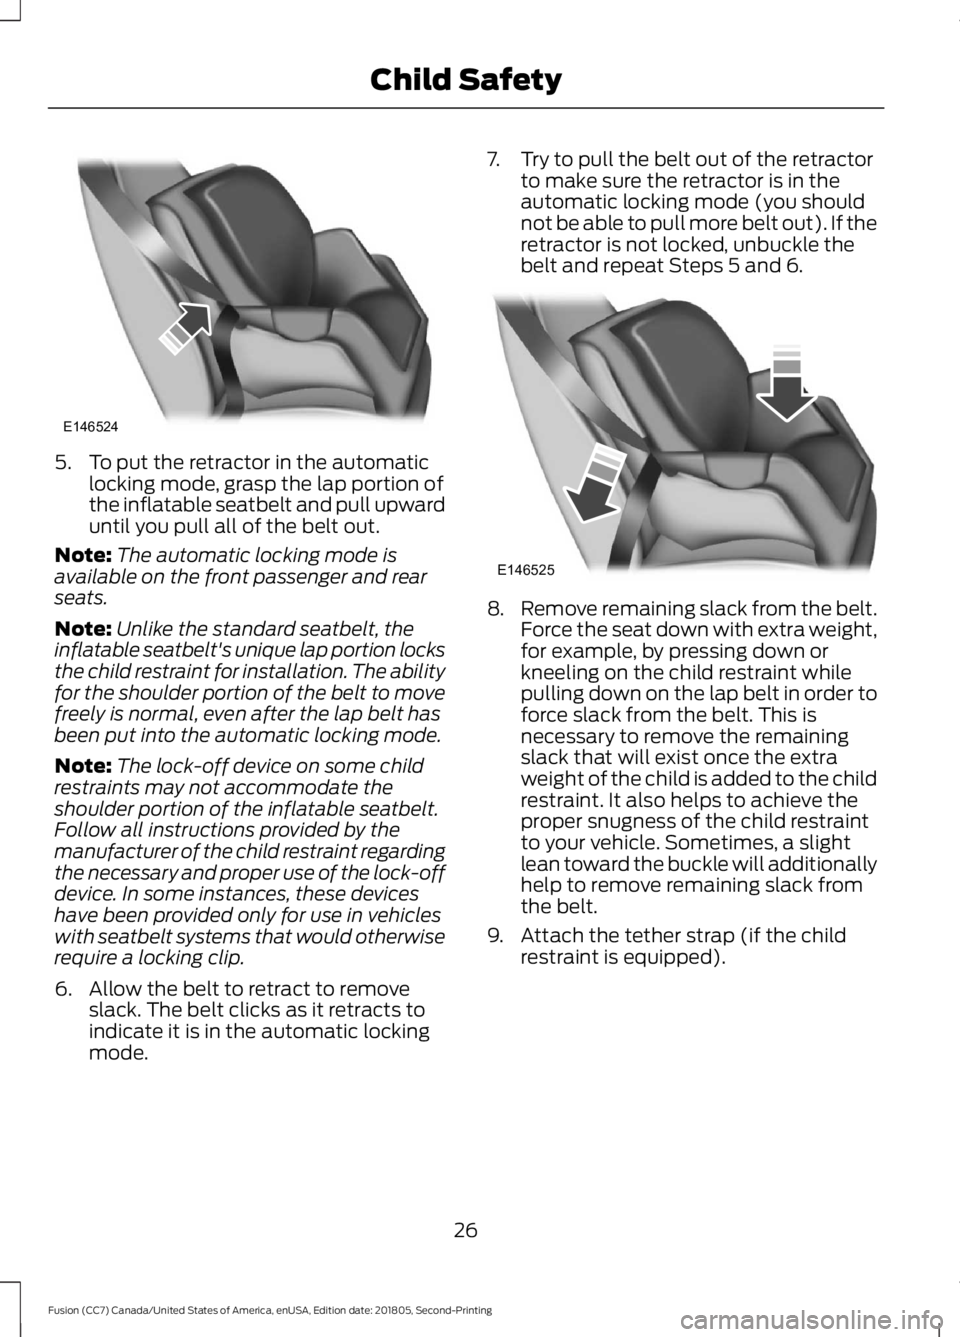 FORD FUSION 2019  Owners Manual 5. To put the retractor in the automatic
locking mode, grasp the lap portion of
the inflatable seatbelt and pull upward
until you pull all of the belt out.
Note: The automatic locking mode is
availabl